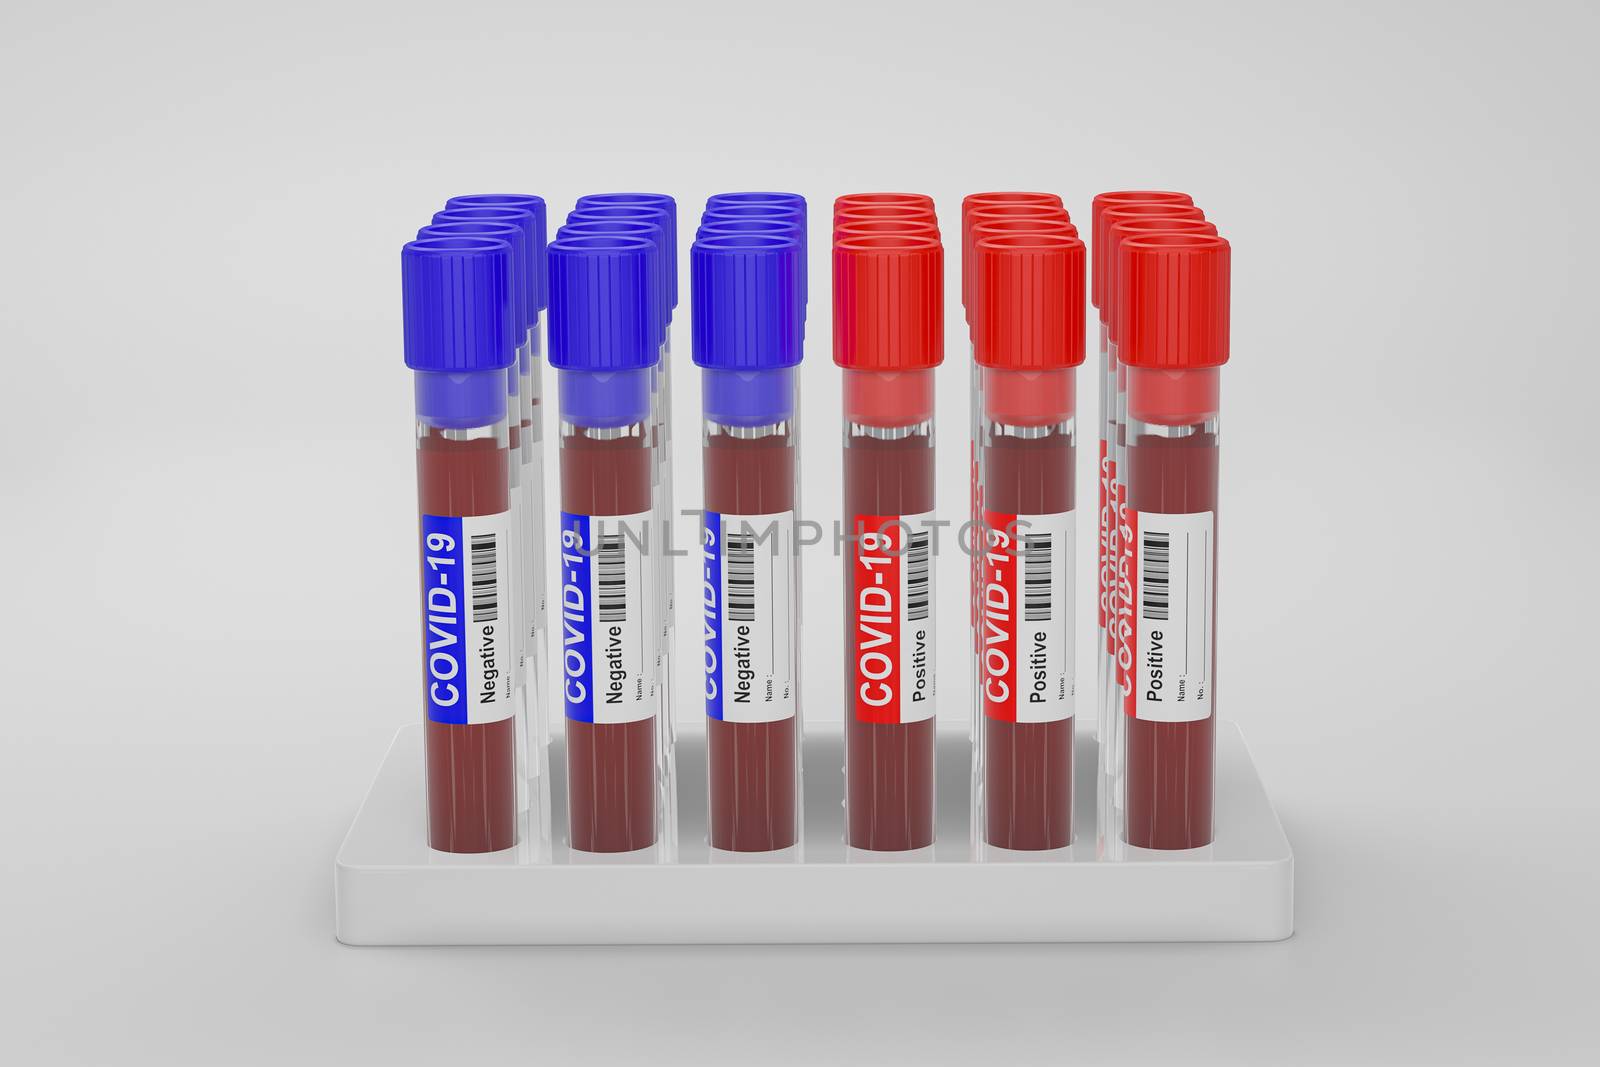 Blood and plasma in test tubes that have been analyzed for COVID-19, 2019-ncov or coronavirus to find a way to stop pandemic. Blue tube, result Negative and Red tube, result positive in laboratory.